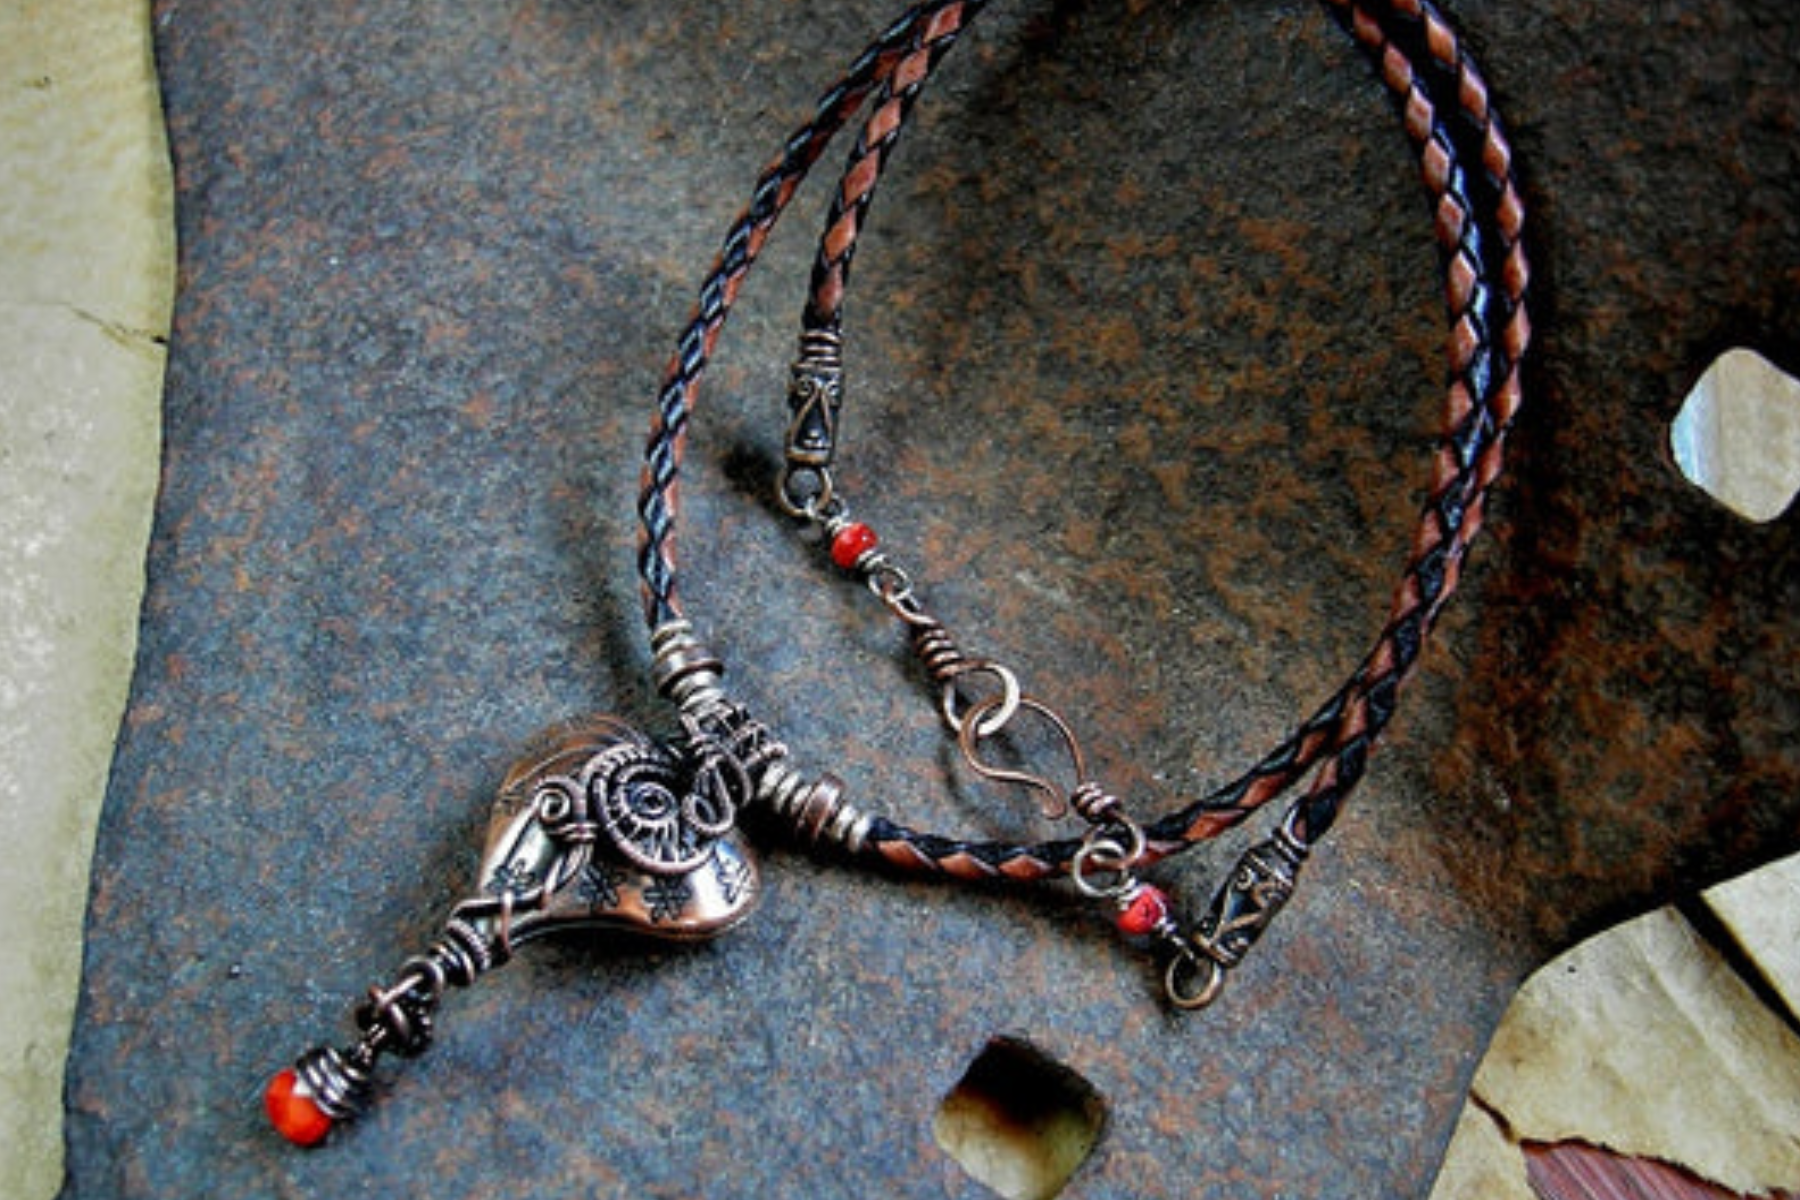 A love knot necklace on the solid rock floor